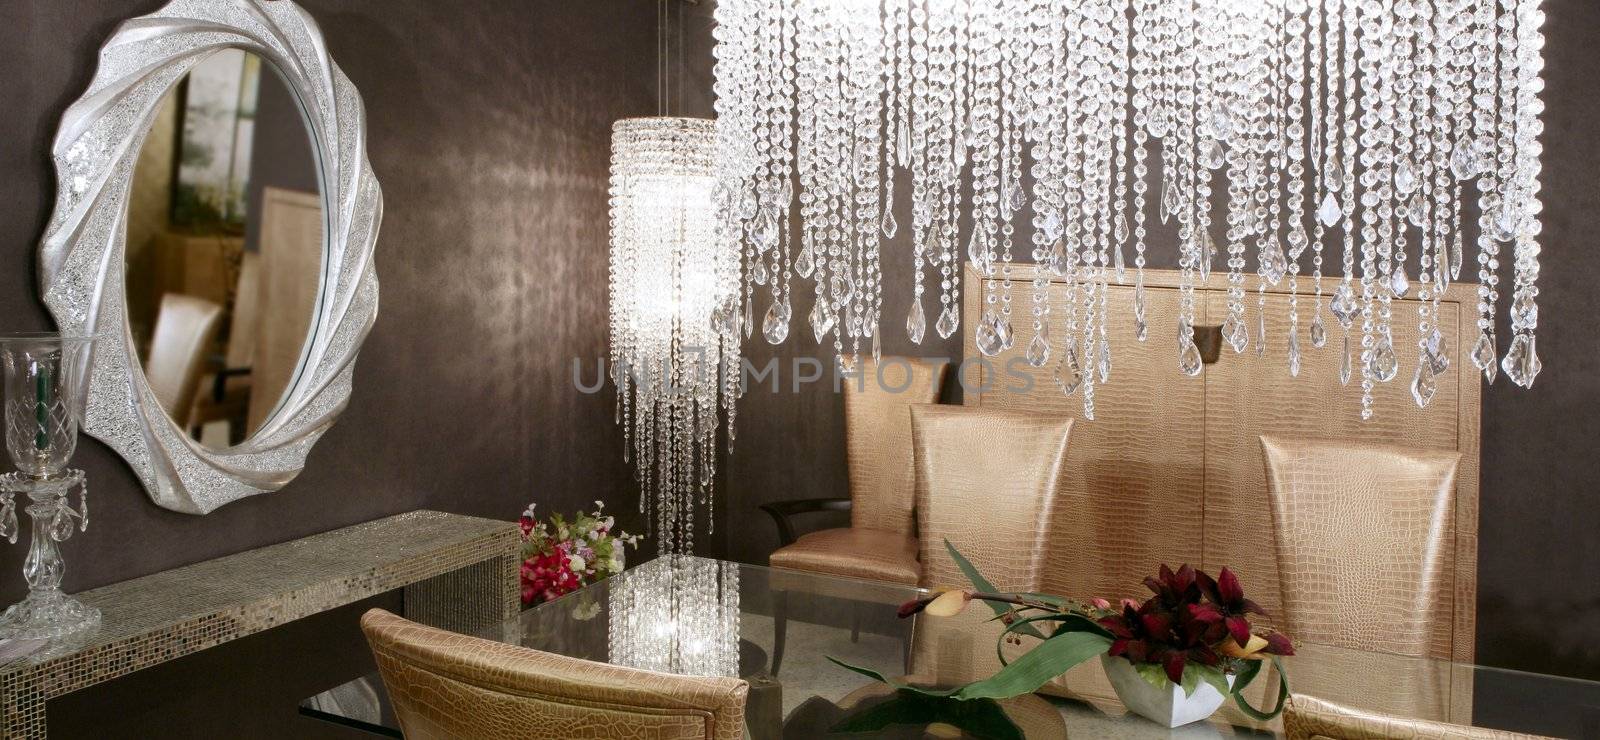 dining room crystal lamp golden chairs by lunamarina